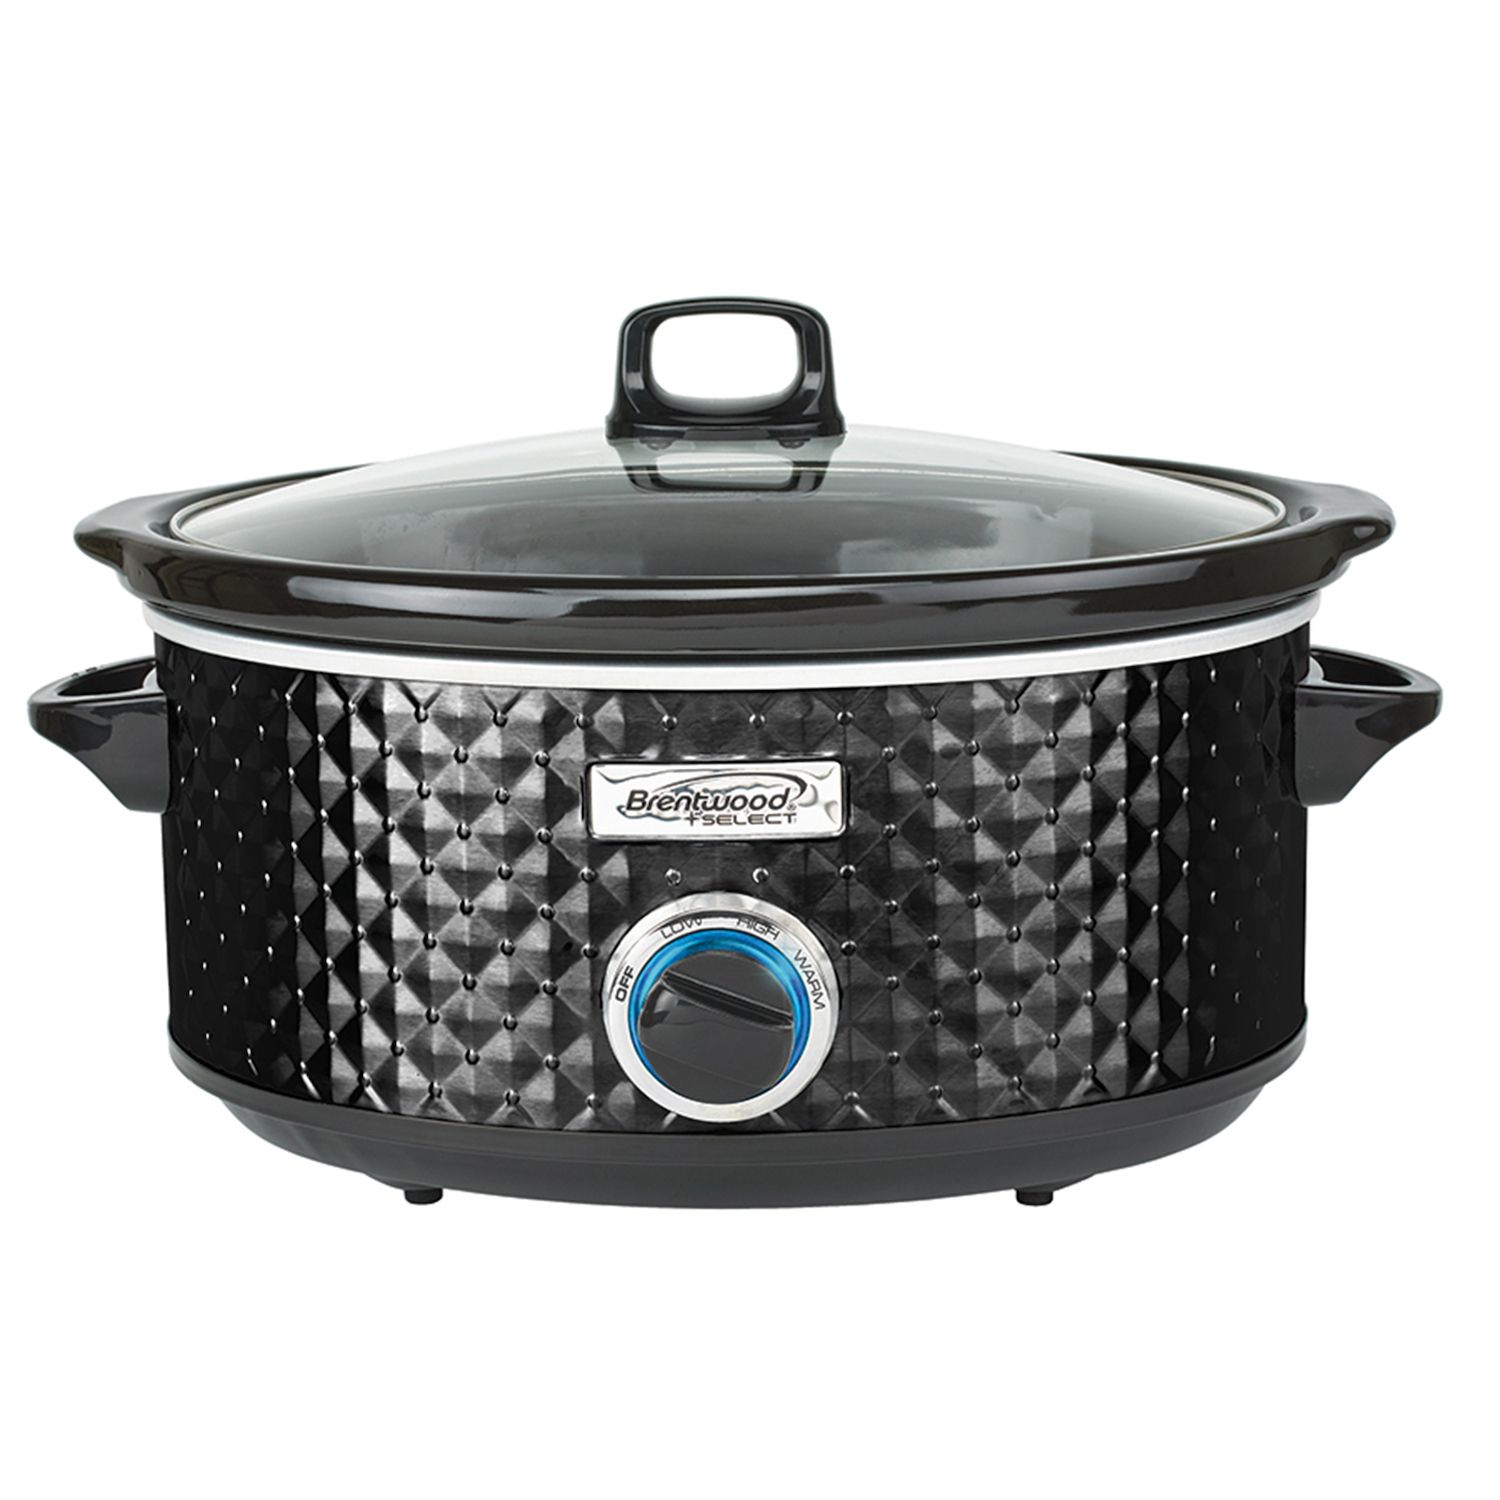 brentwood 8-Quart White Oval Slow Cooker at